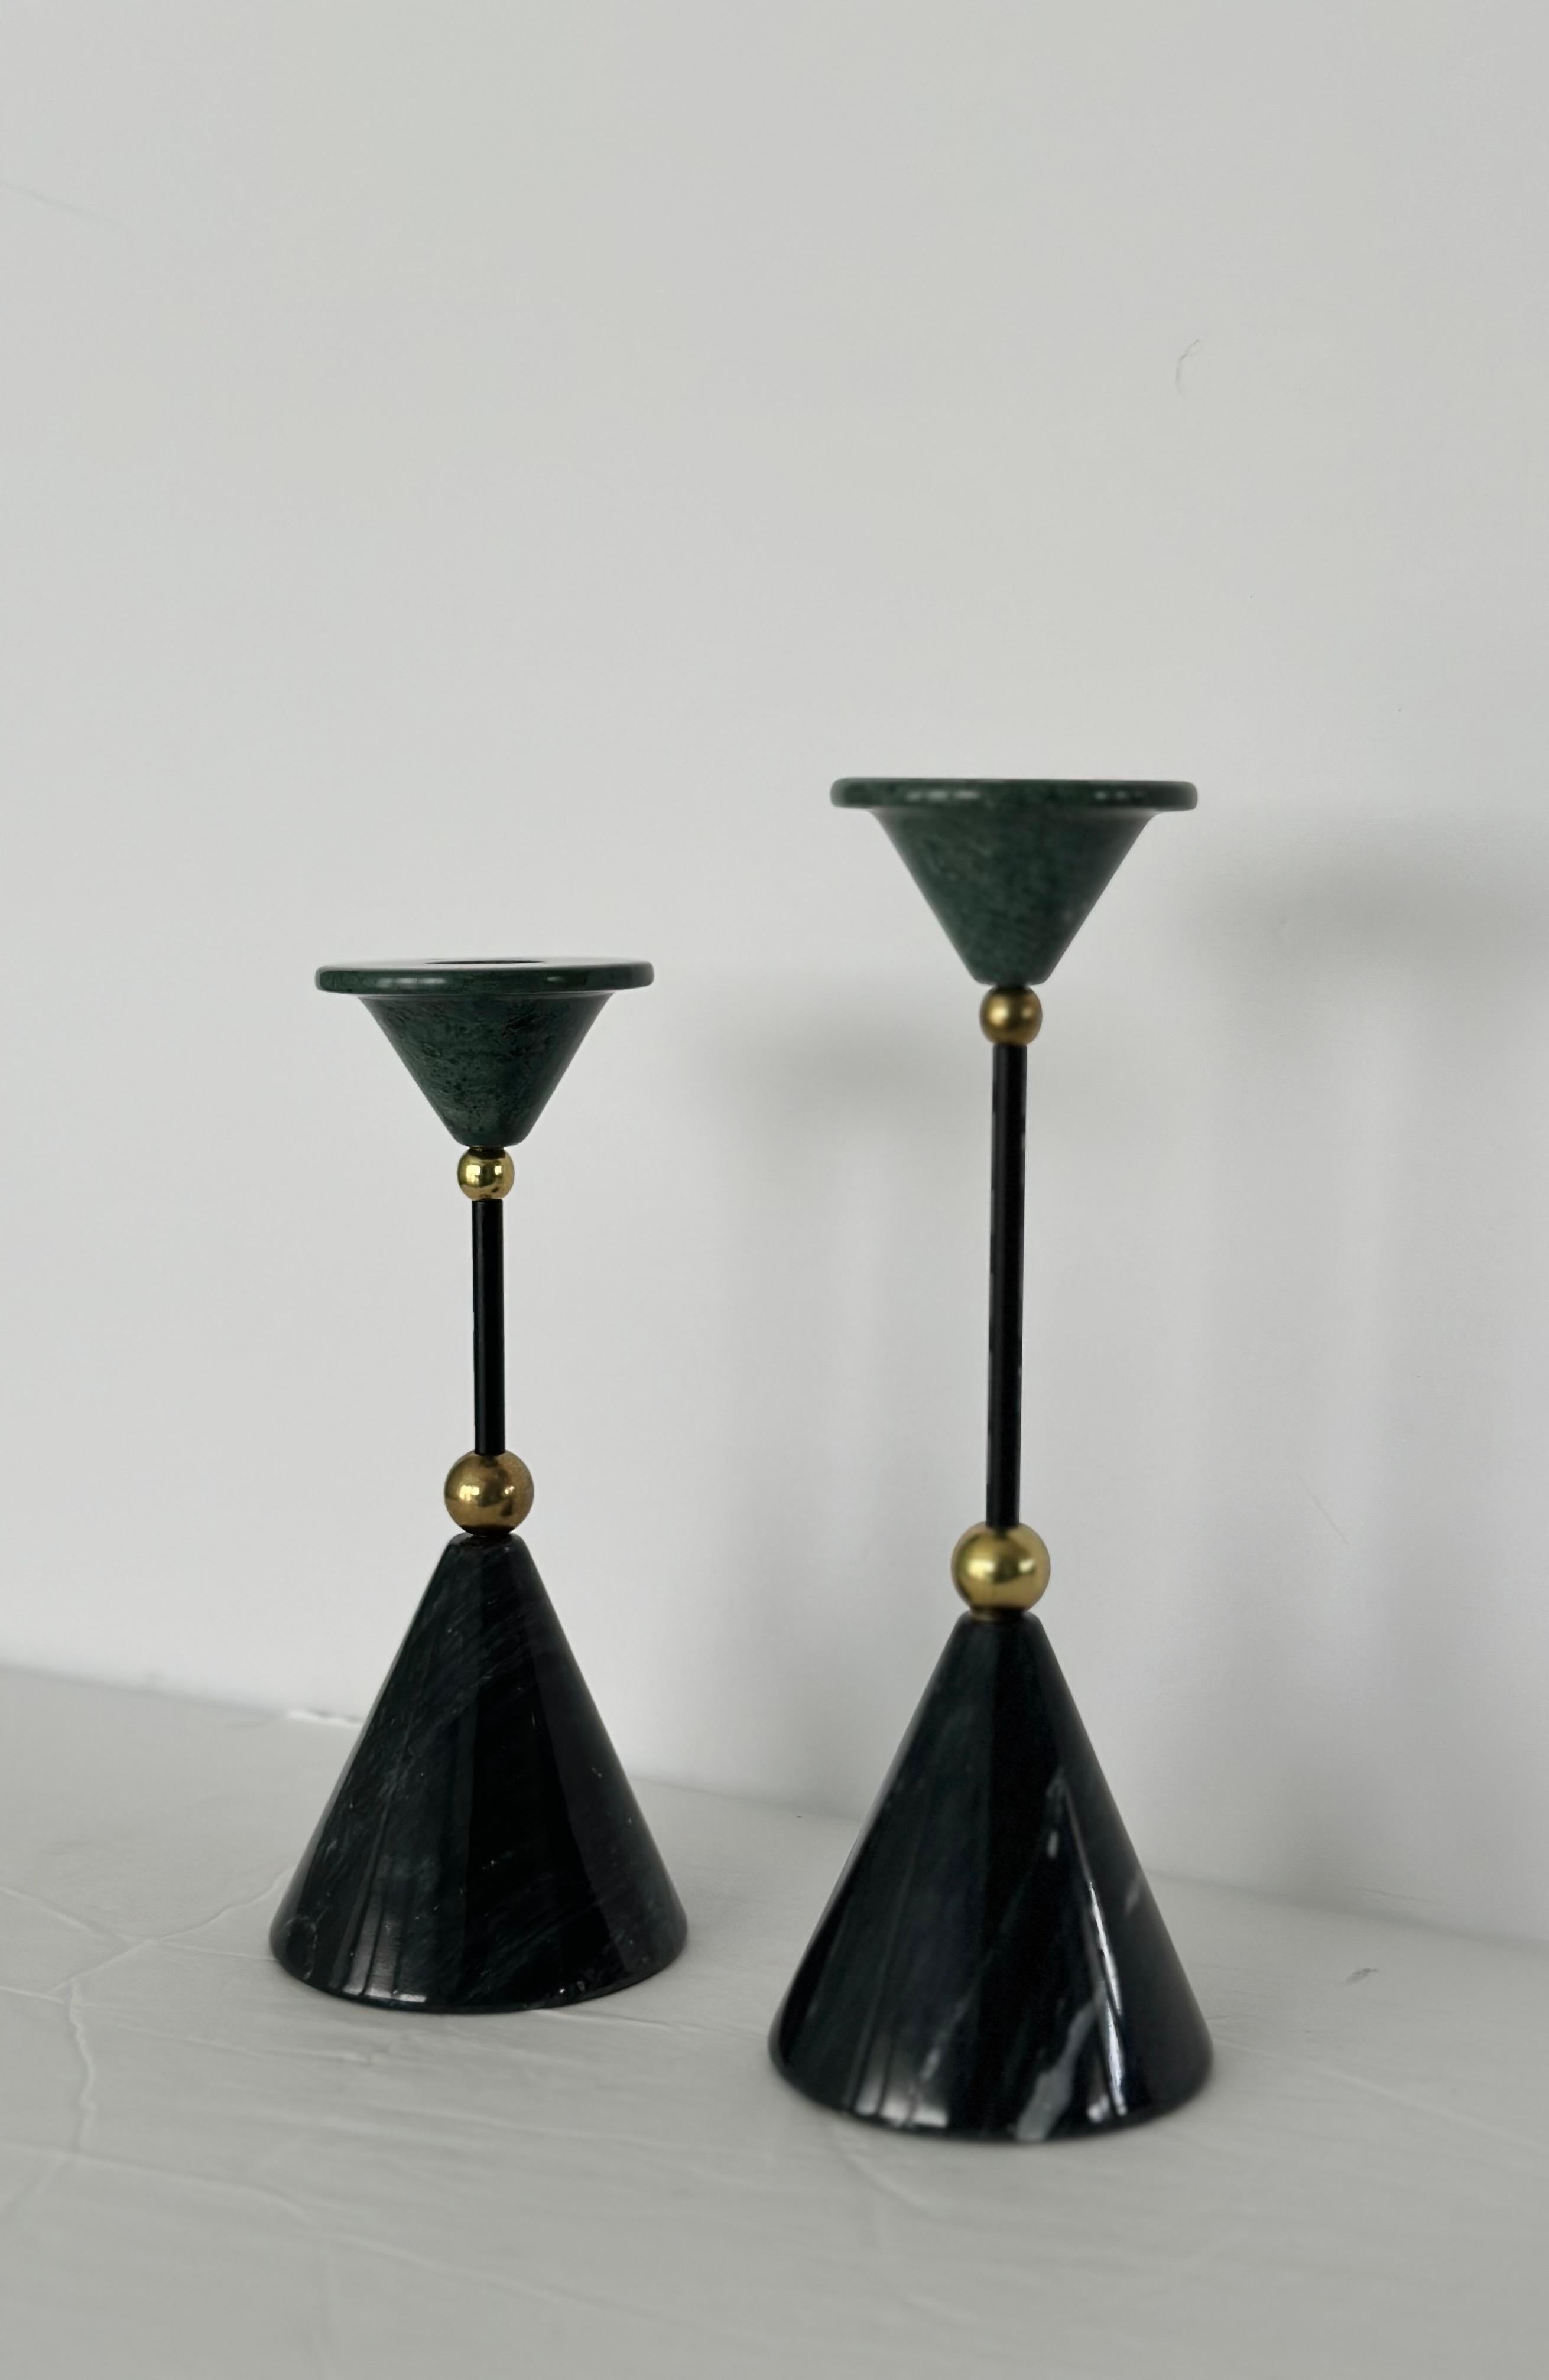 We are very pleased to offer a pair of avant-garde candlesticks, circa the 1980s.  The foundation of each piece is a robust cone which then transitions into an inverted cone at the top.  The journey between these two points is marked by a sequence